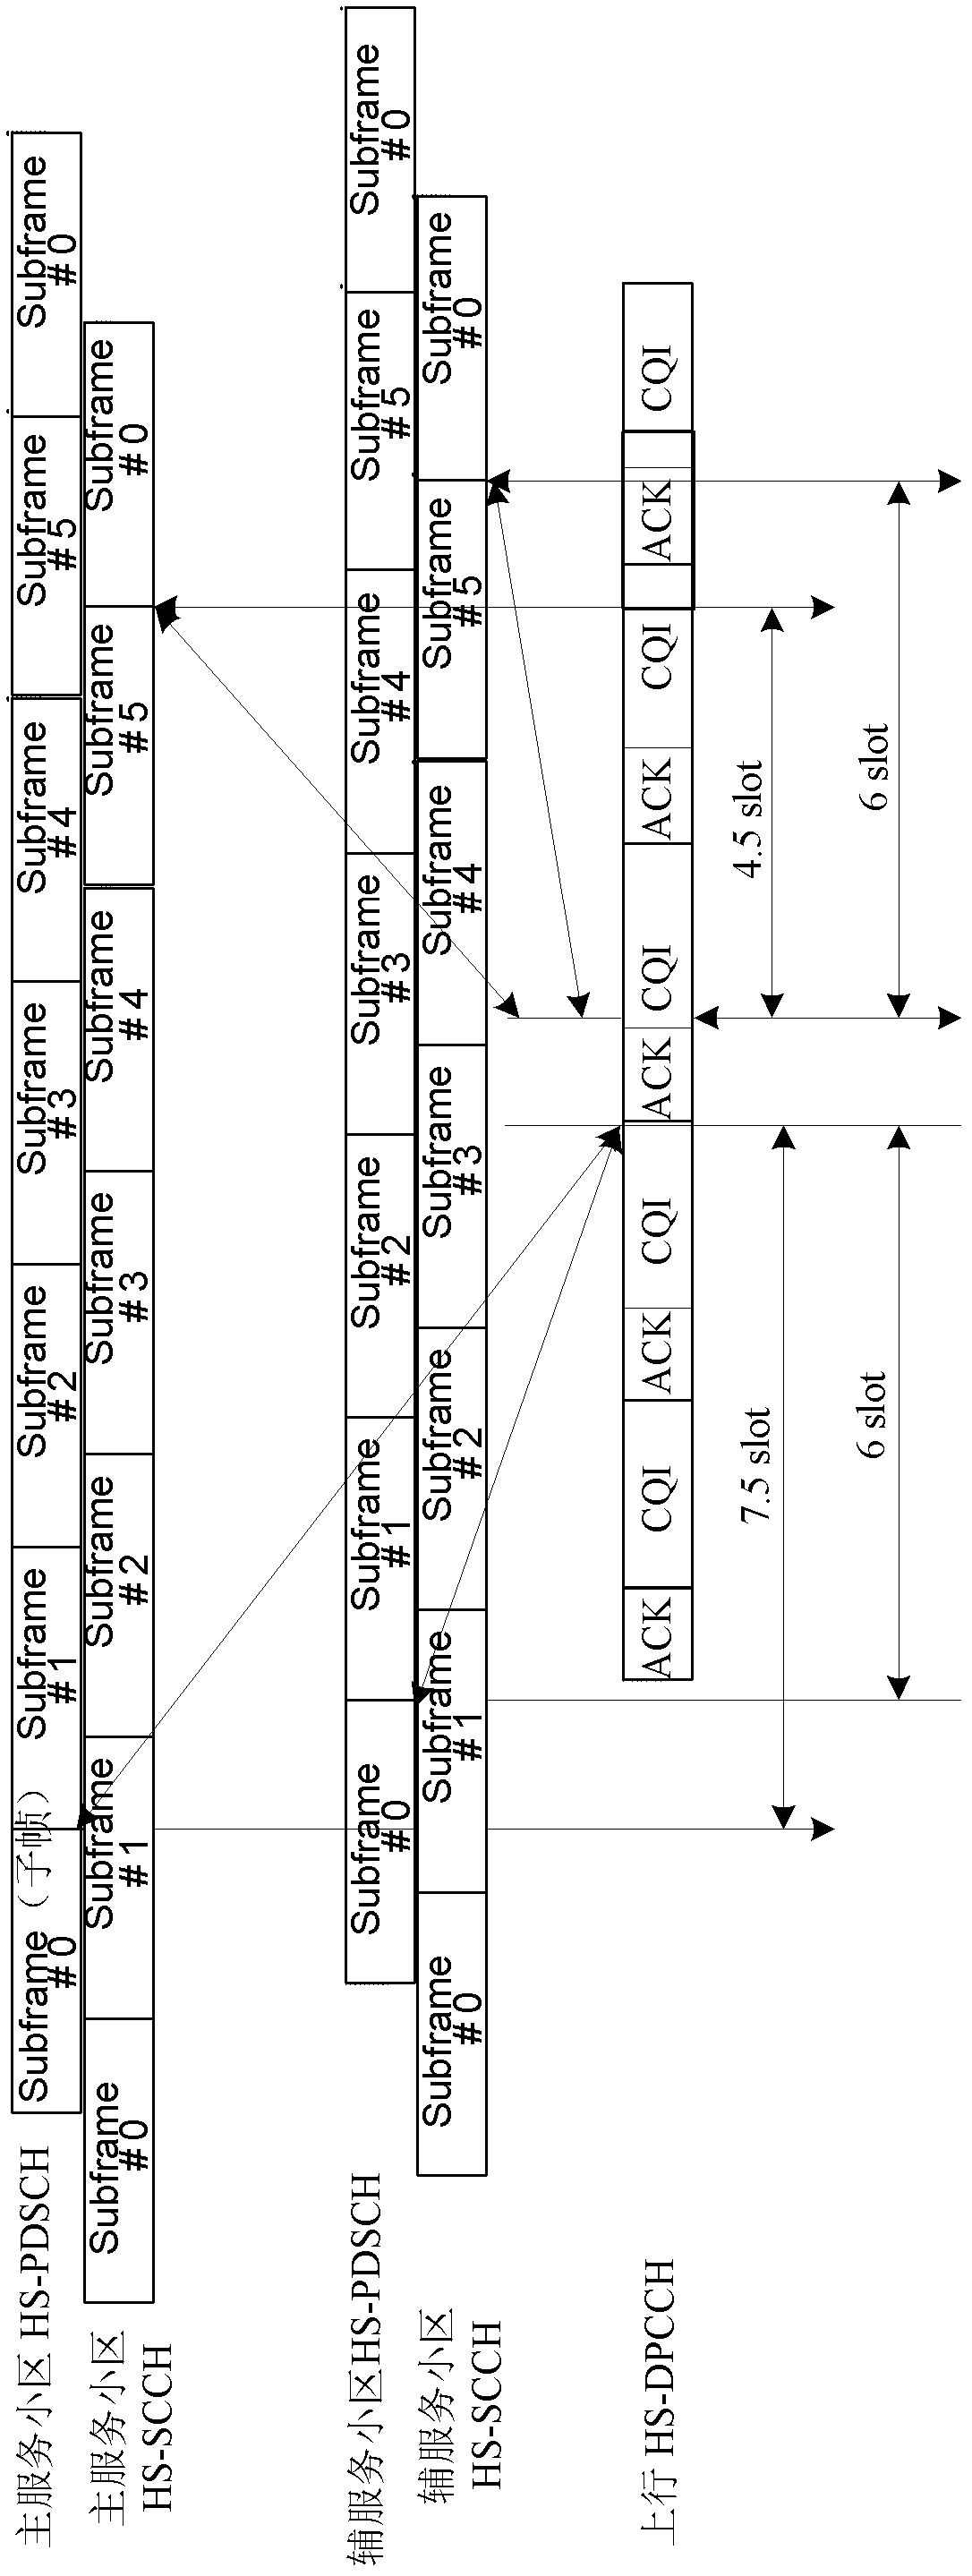 Method for activating multi-flow transmission user equipment (UE) to transmit high speed (HS)- dedicated physical control channel (DPCCH) and UE